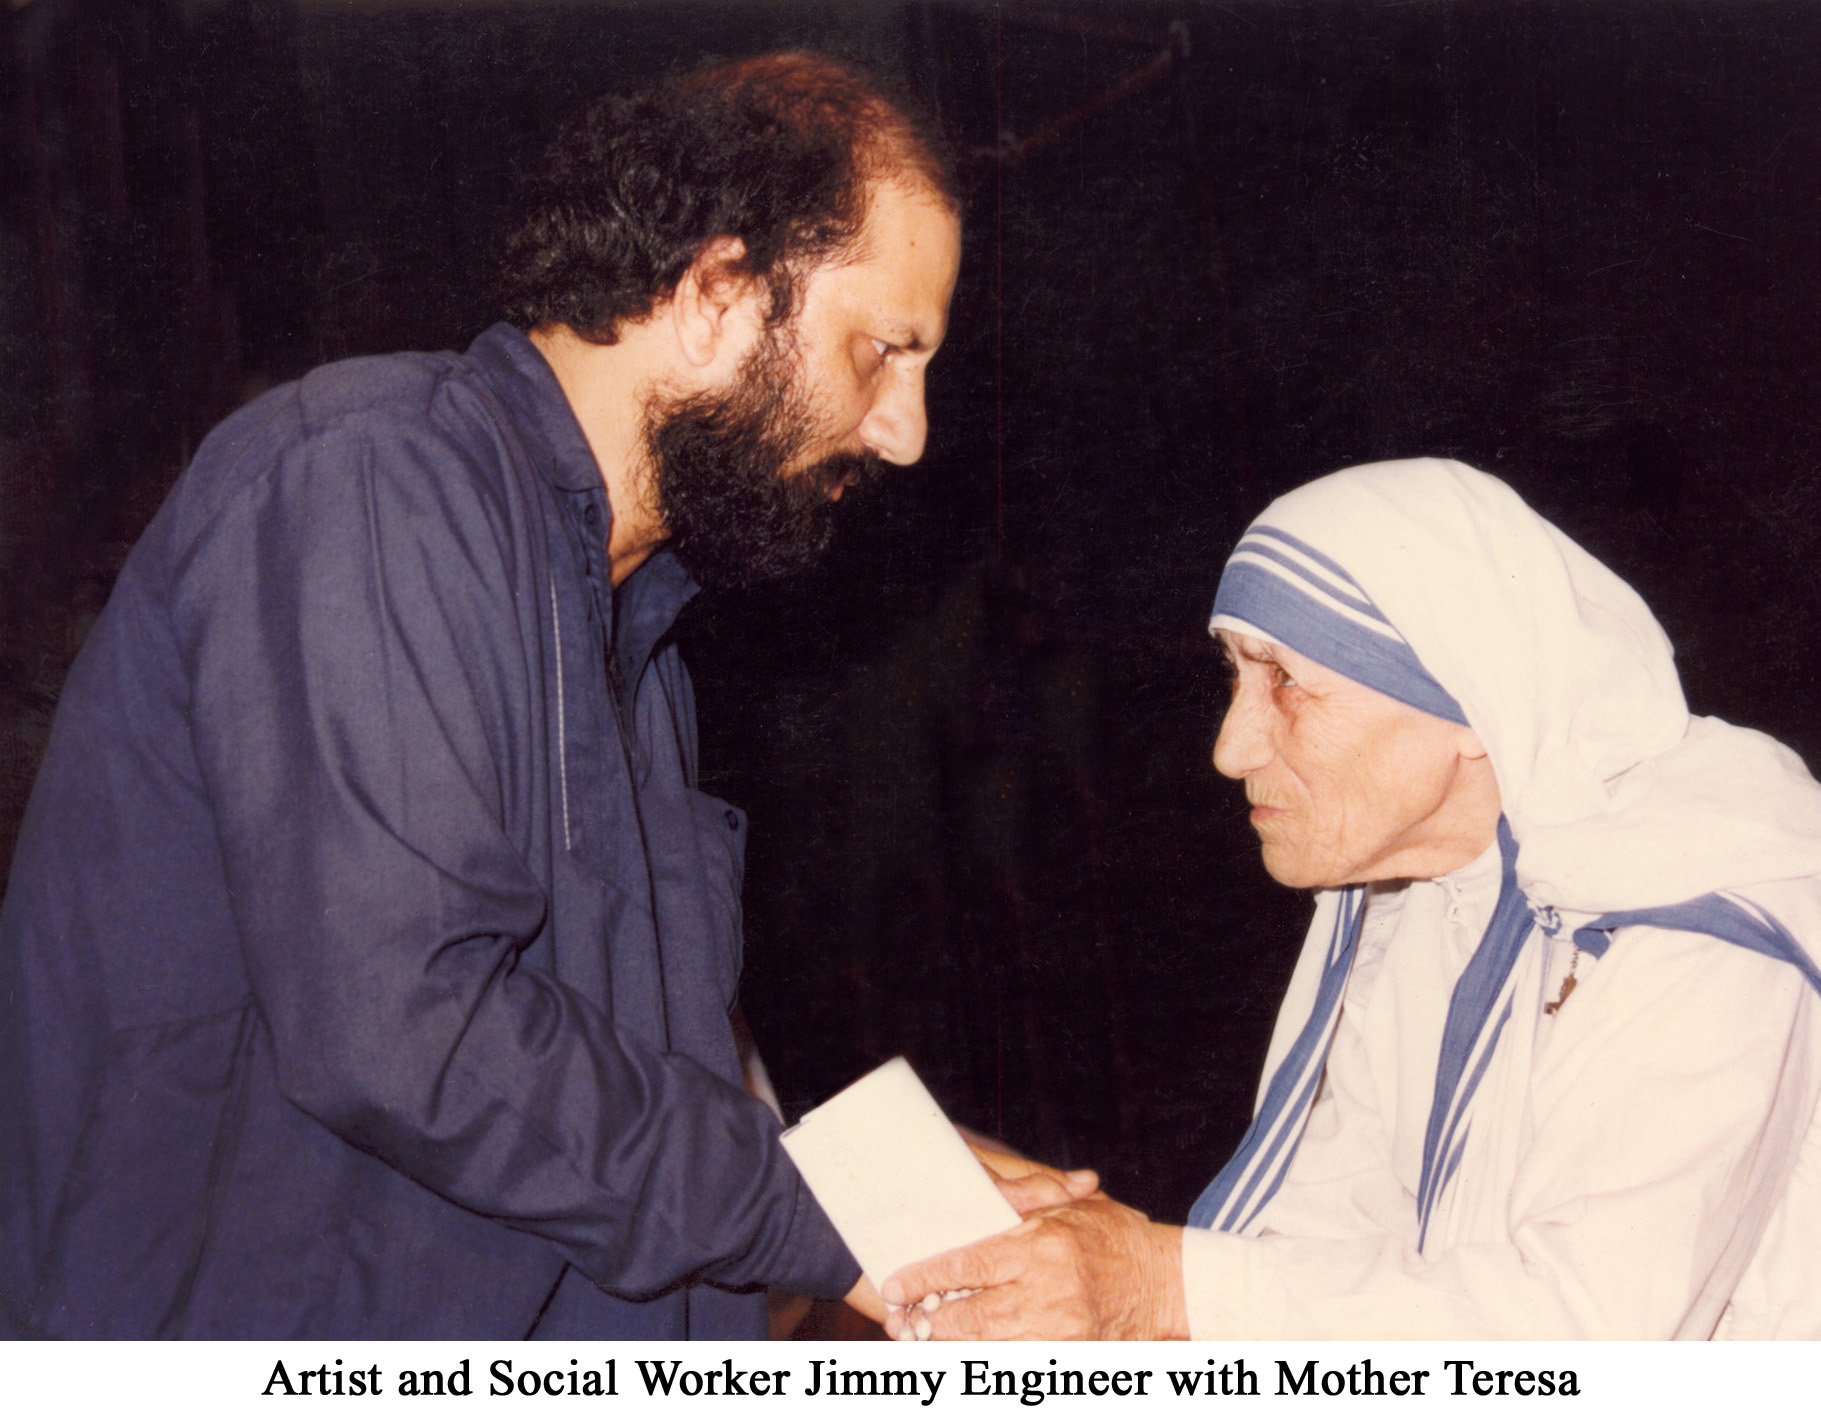 Artist and Social Worker Jimmy Engineer with Mother Teresa